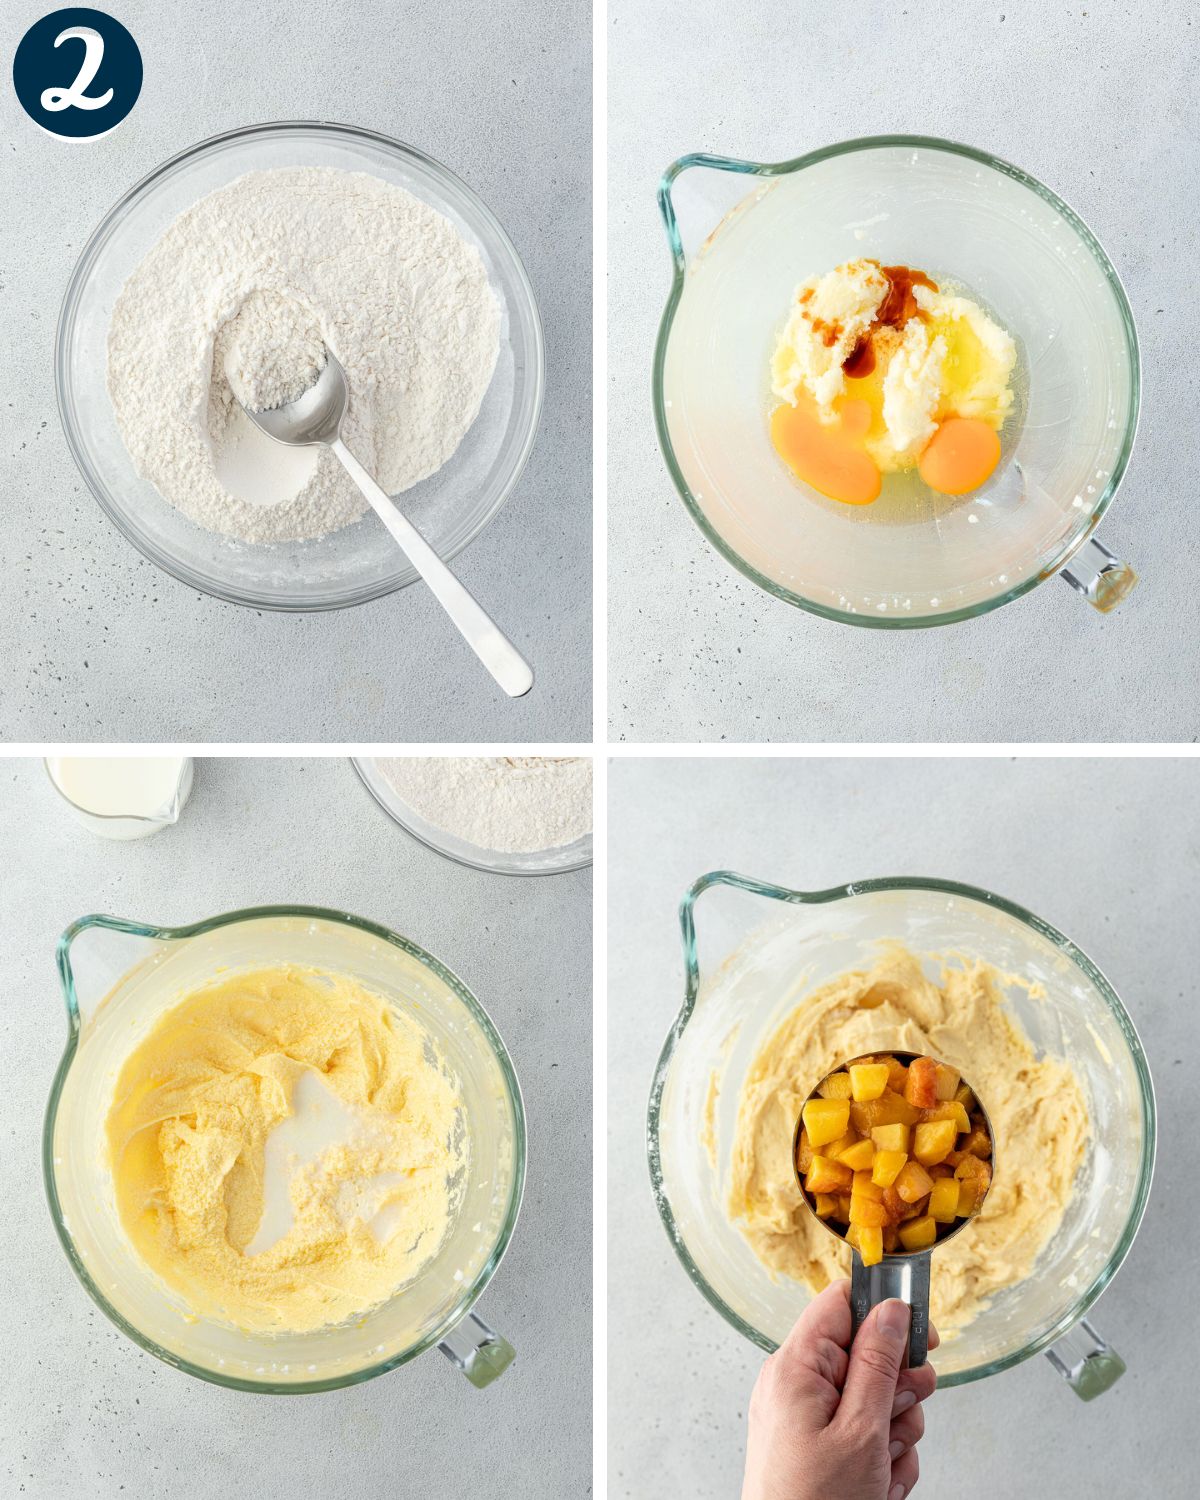 A 4-panel image showing the steps of making the batter: Bowl of flour, batter with eggs and vanilla, batter with spash of milk, and finally batter with a cup of chopped peaches held over it.